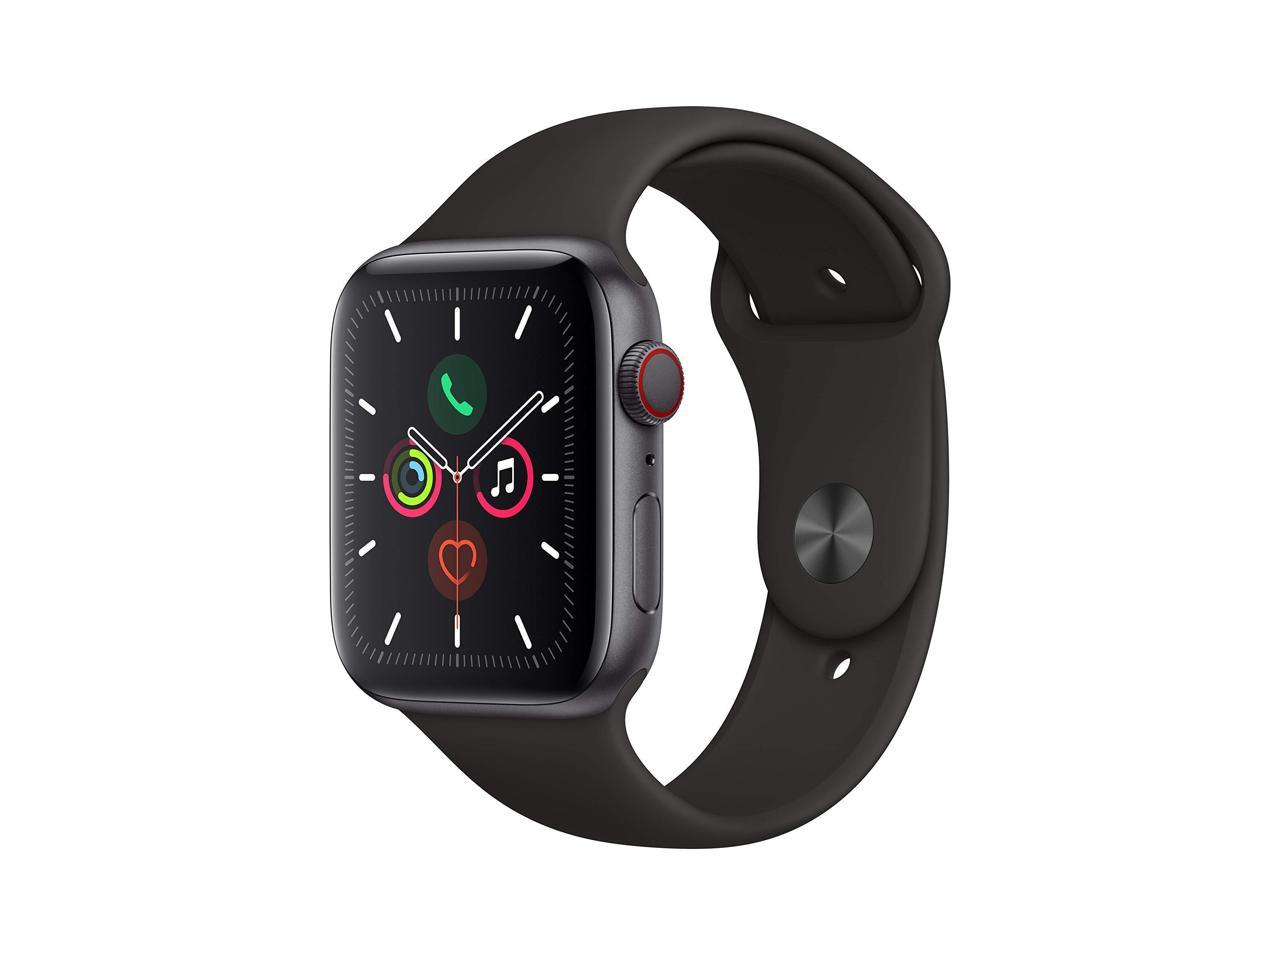 Apple Watch Series 5 (GPS + Cellular, 44mm) - Space Gray Aluminum 